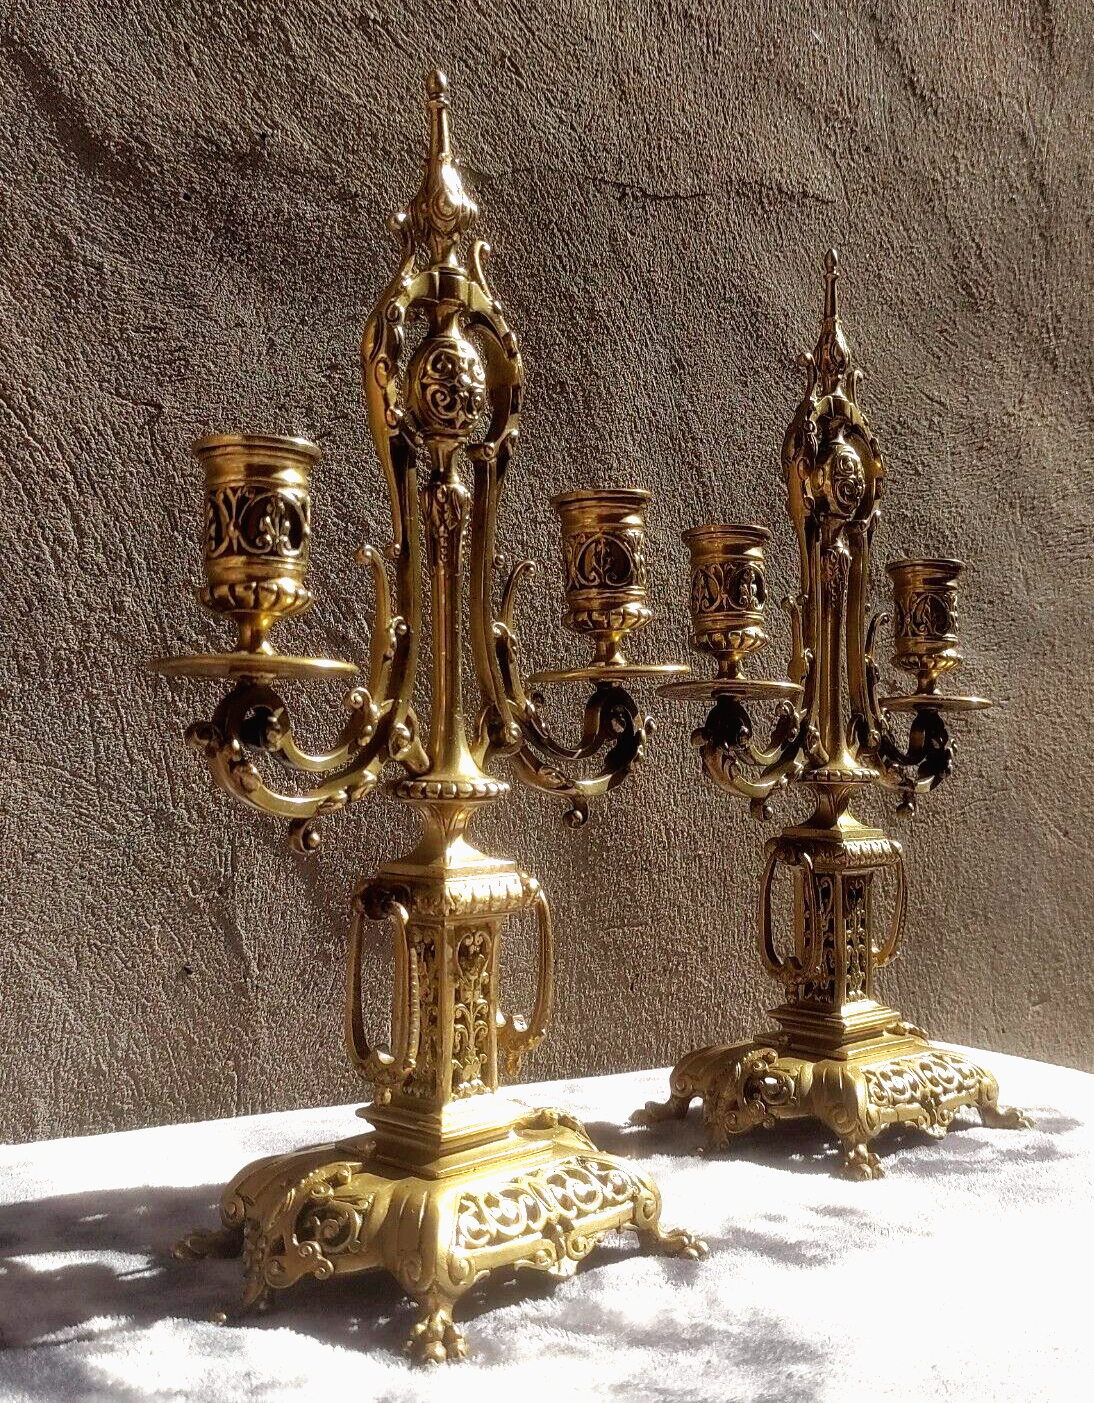 Pair of Ornate Victorian Antique Brass Candelabra Twin Candlestick Holders 36 cm